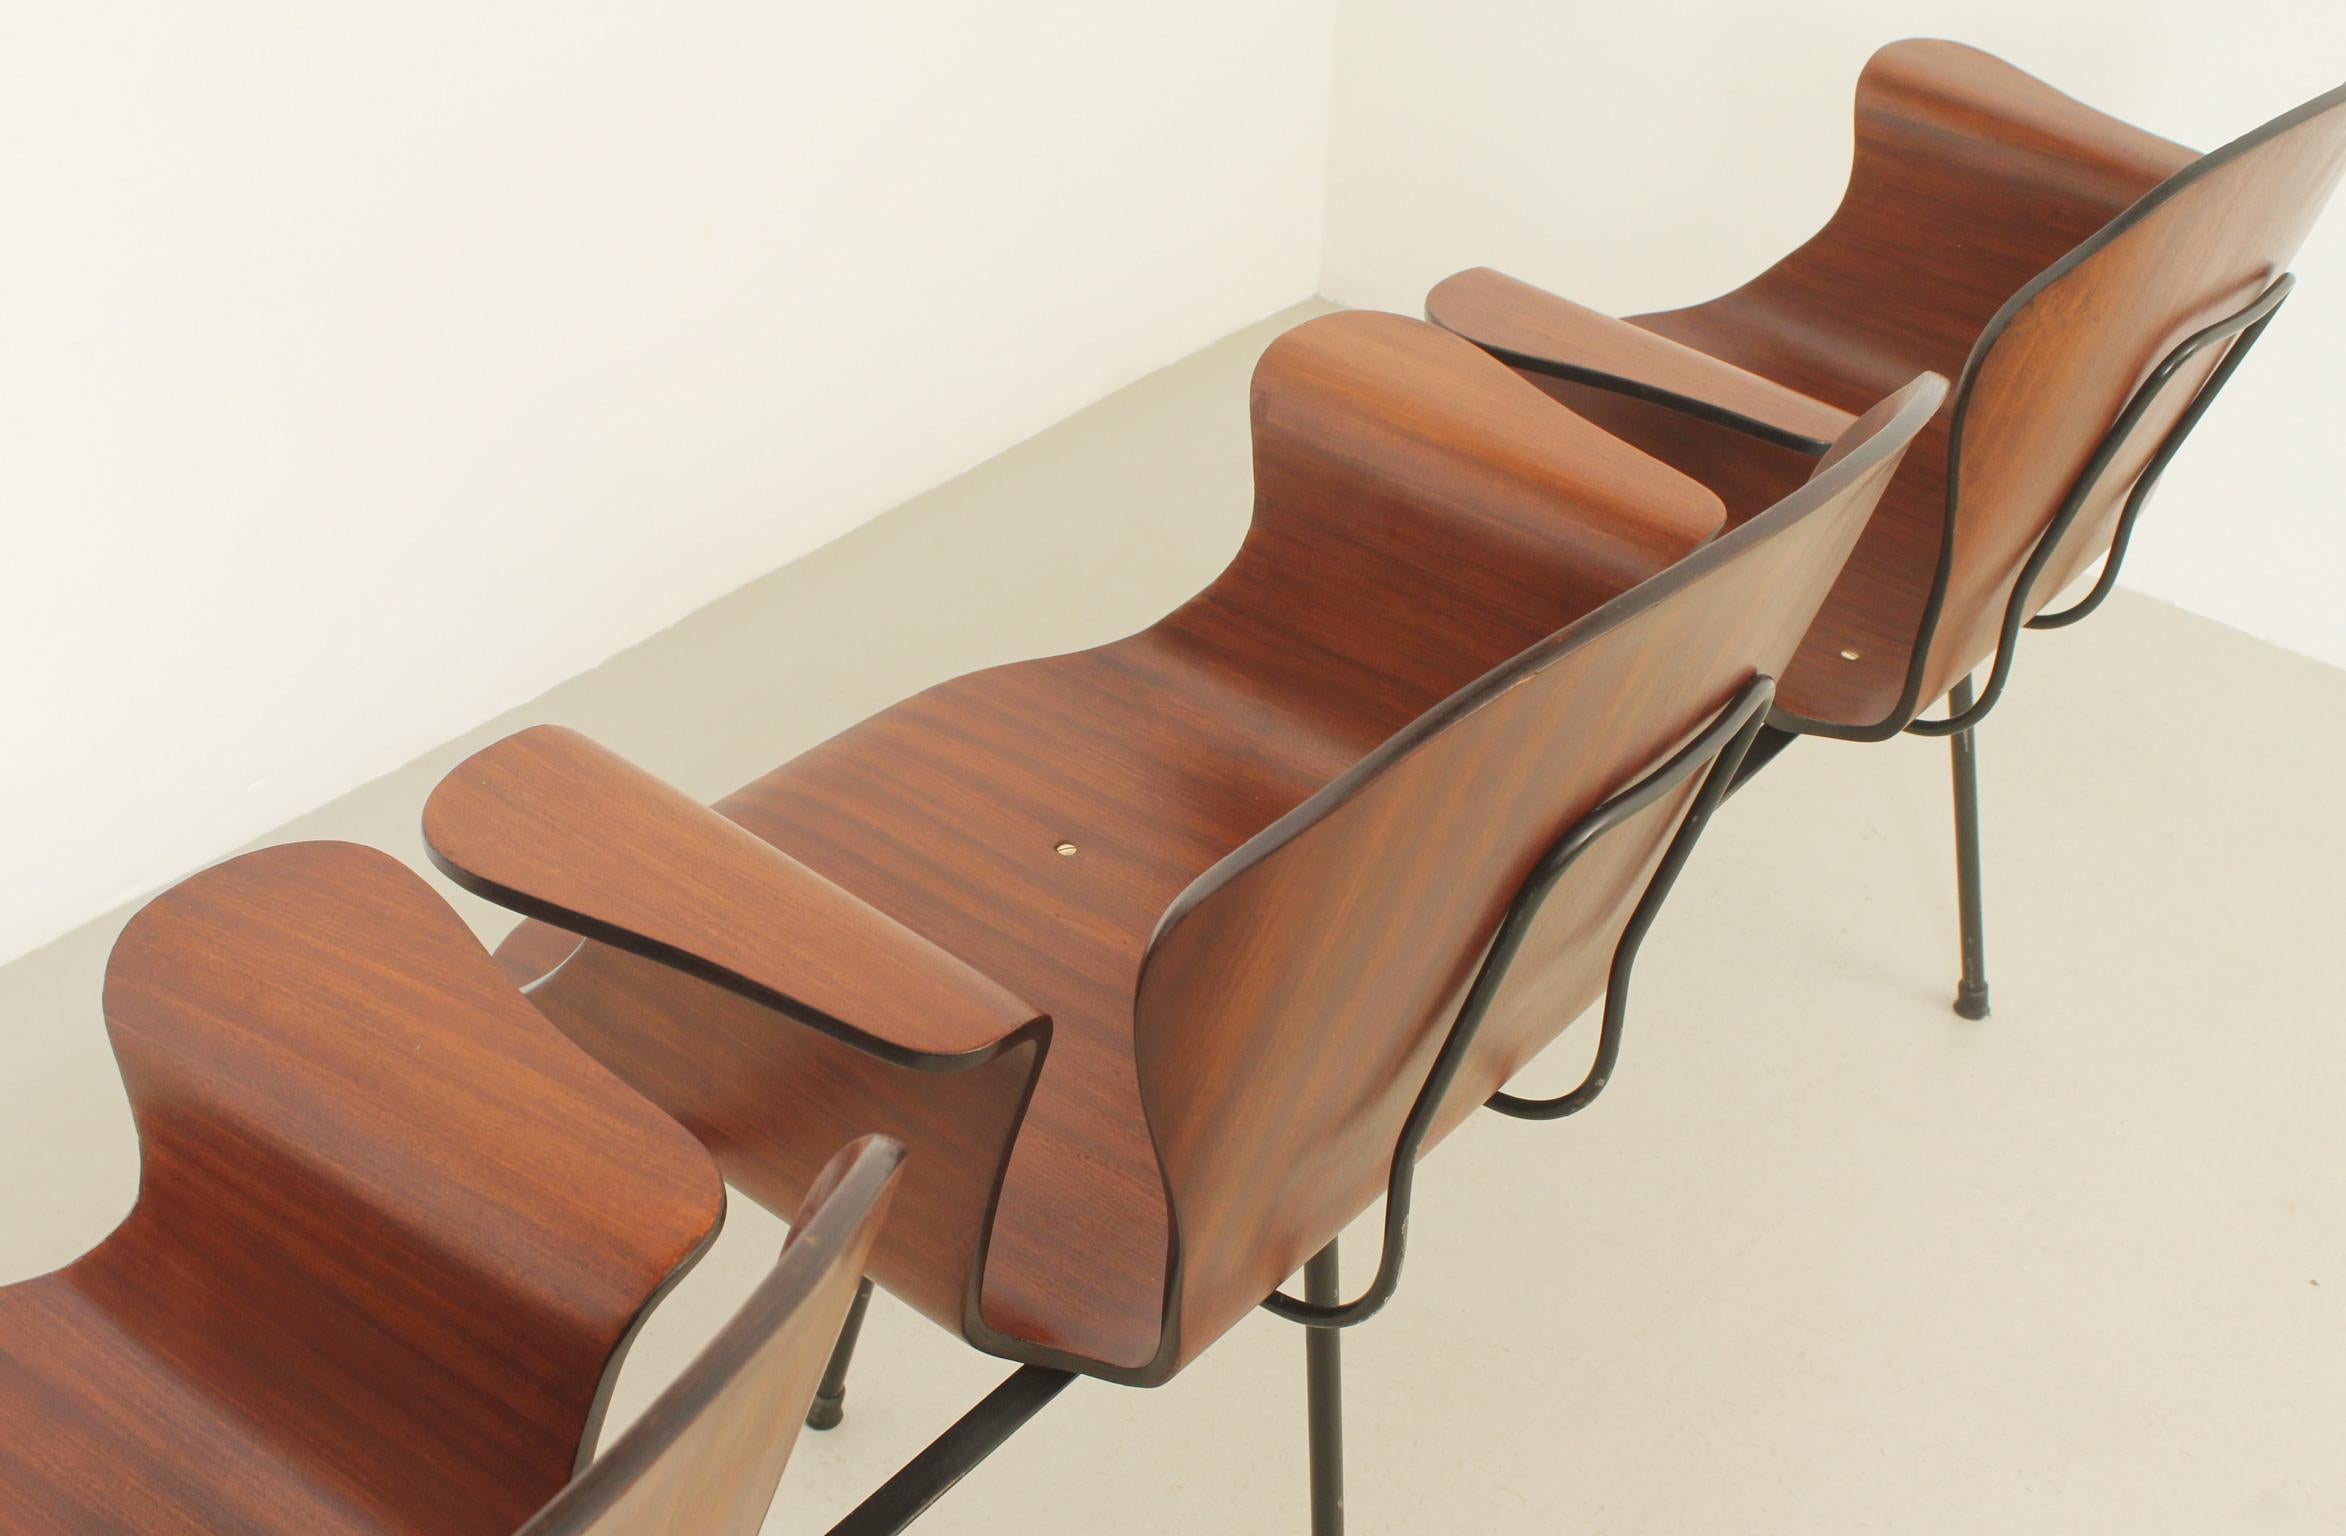 Three Seater Plywood Bench by Carlo Ratti, Italy, 1950's For Sale 7